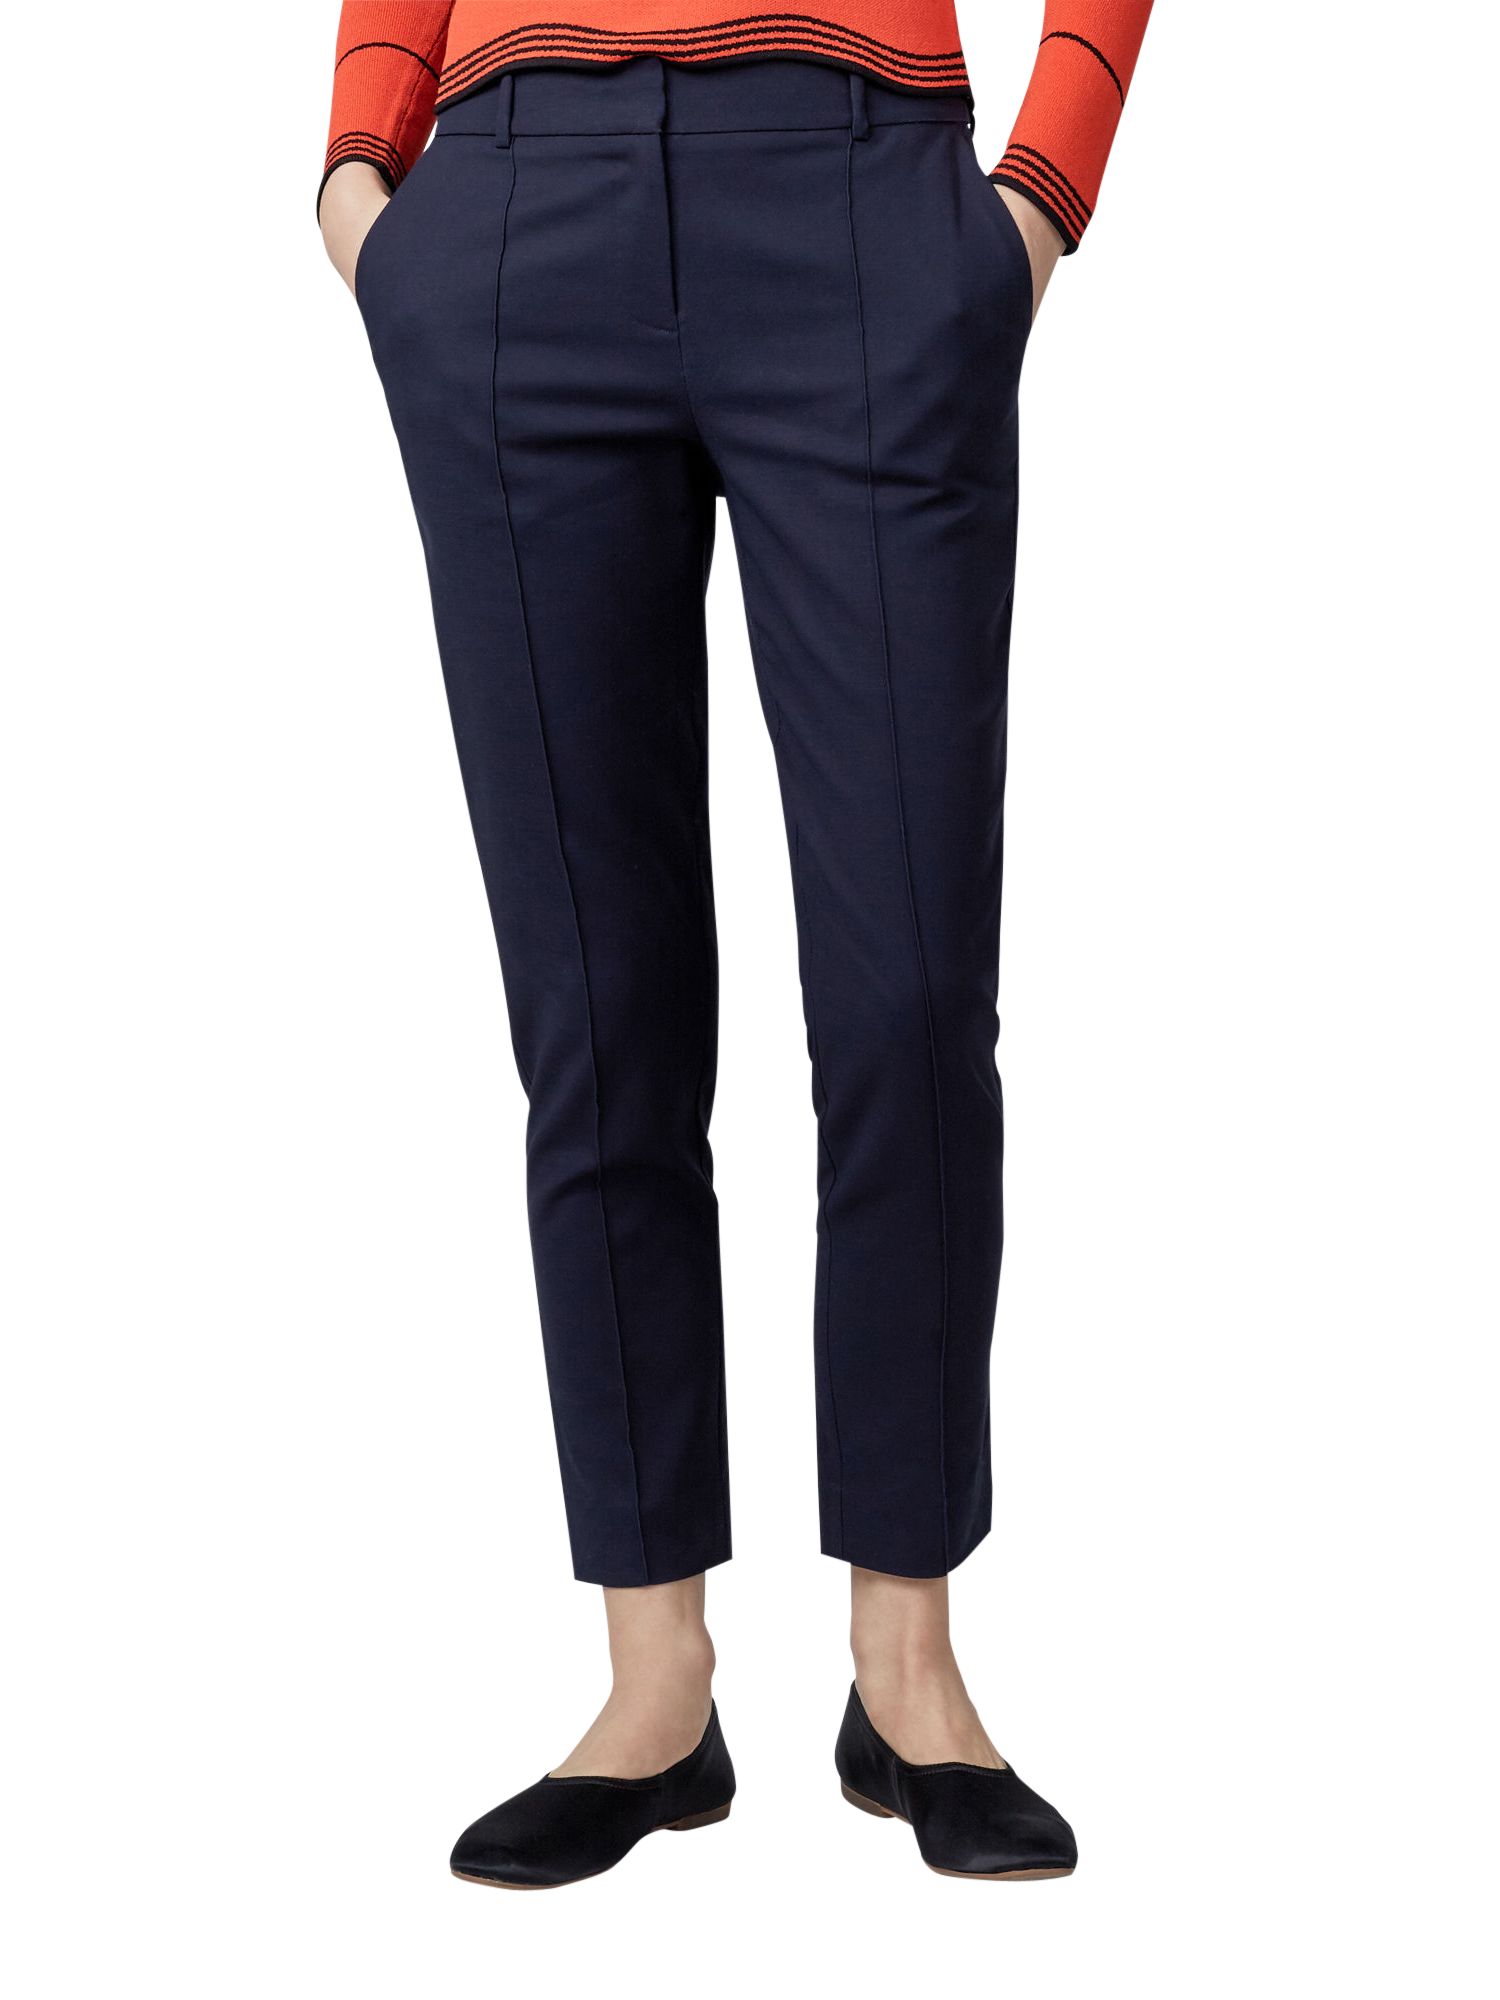 Warehouse Compact Cotton Trousers, Navy, 14